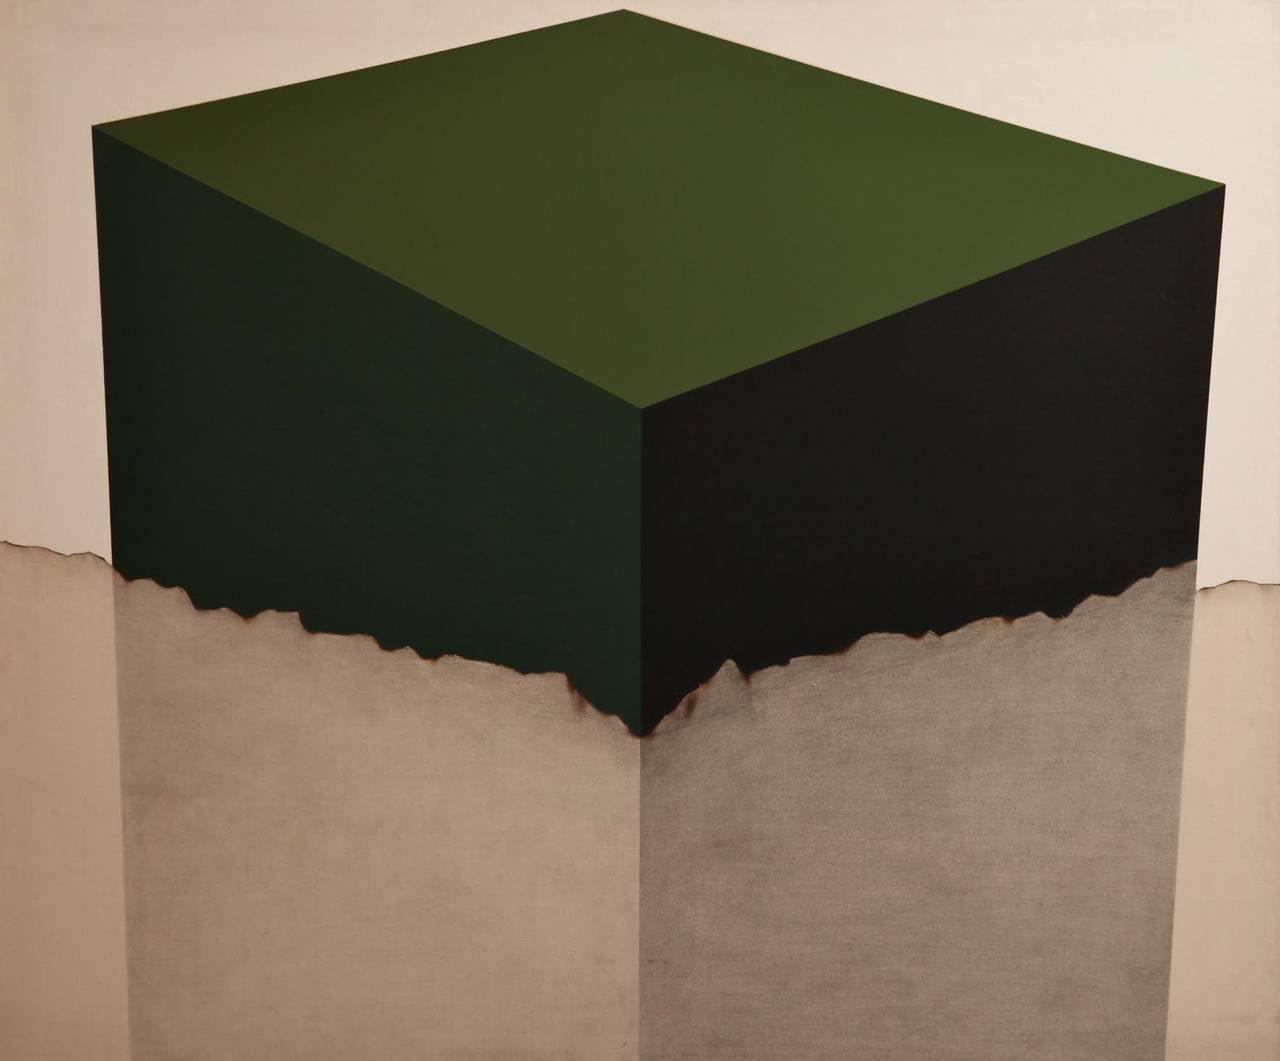 Cube - Painting by David Prentice